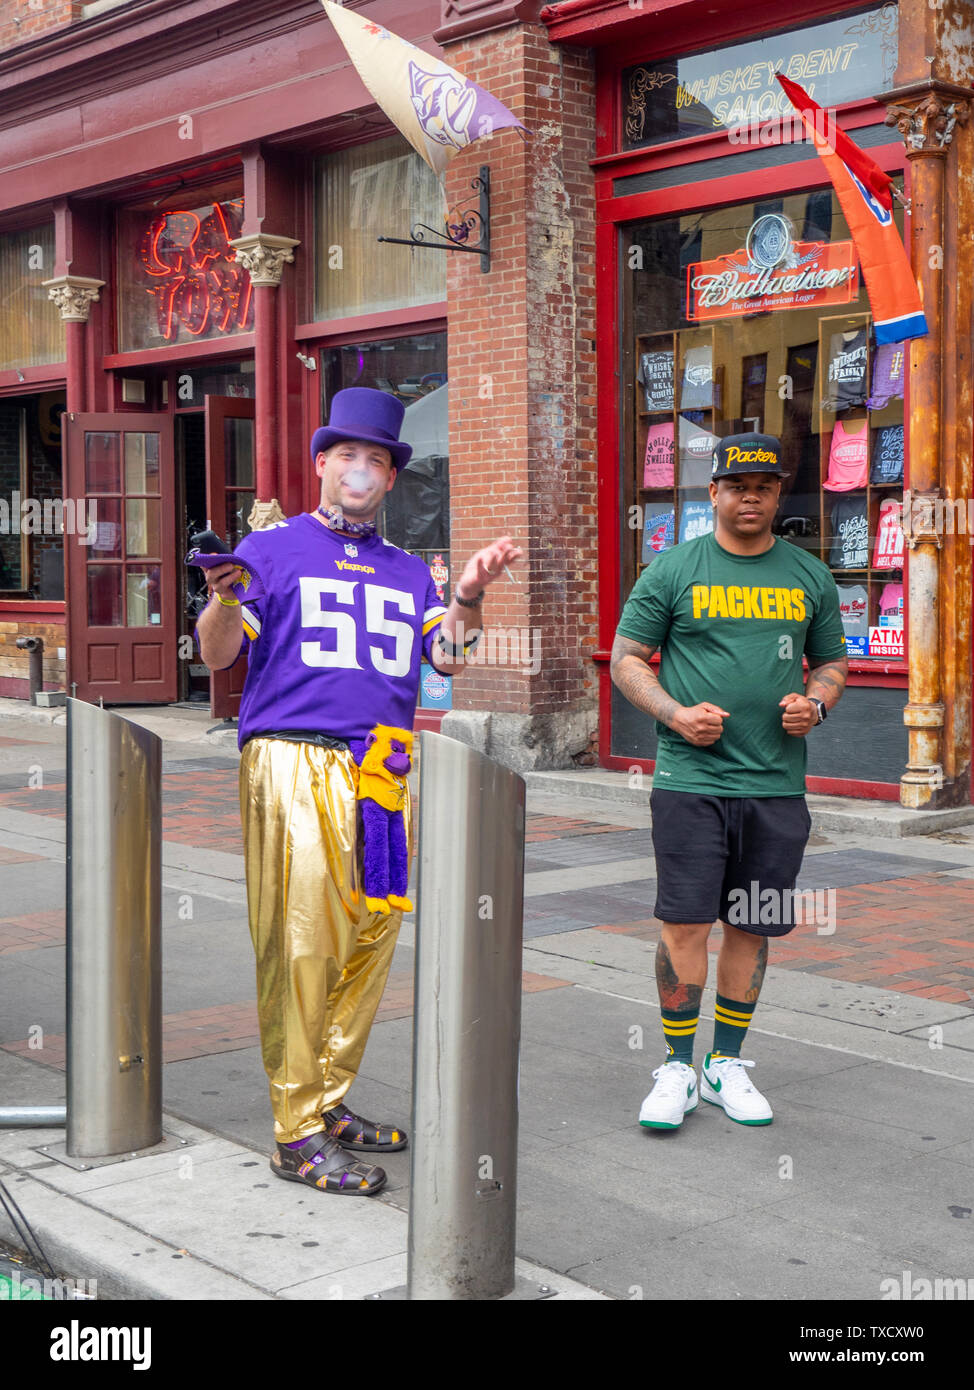 Minnesota Vikings and Green Bay Packers football fans on Broadway at NFL Draft 2019 Nashville Tennessee. Stock Photo